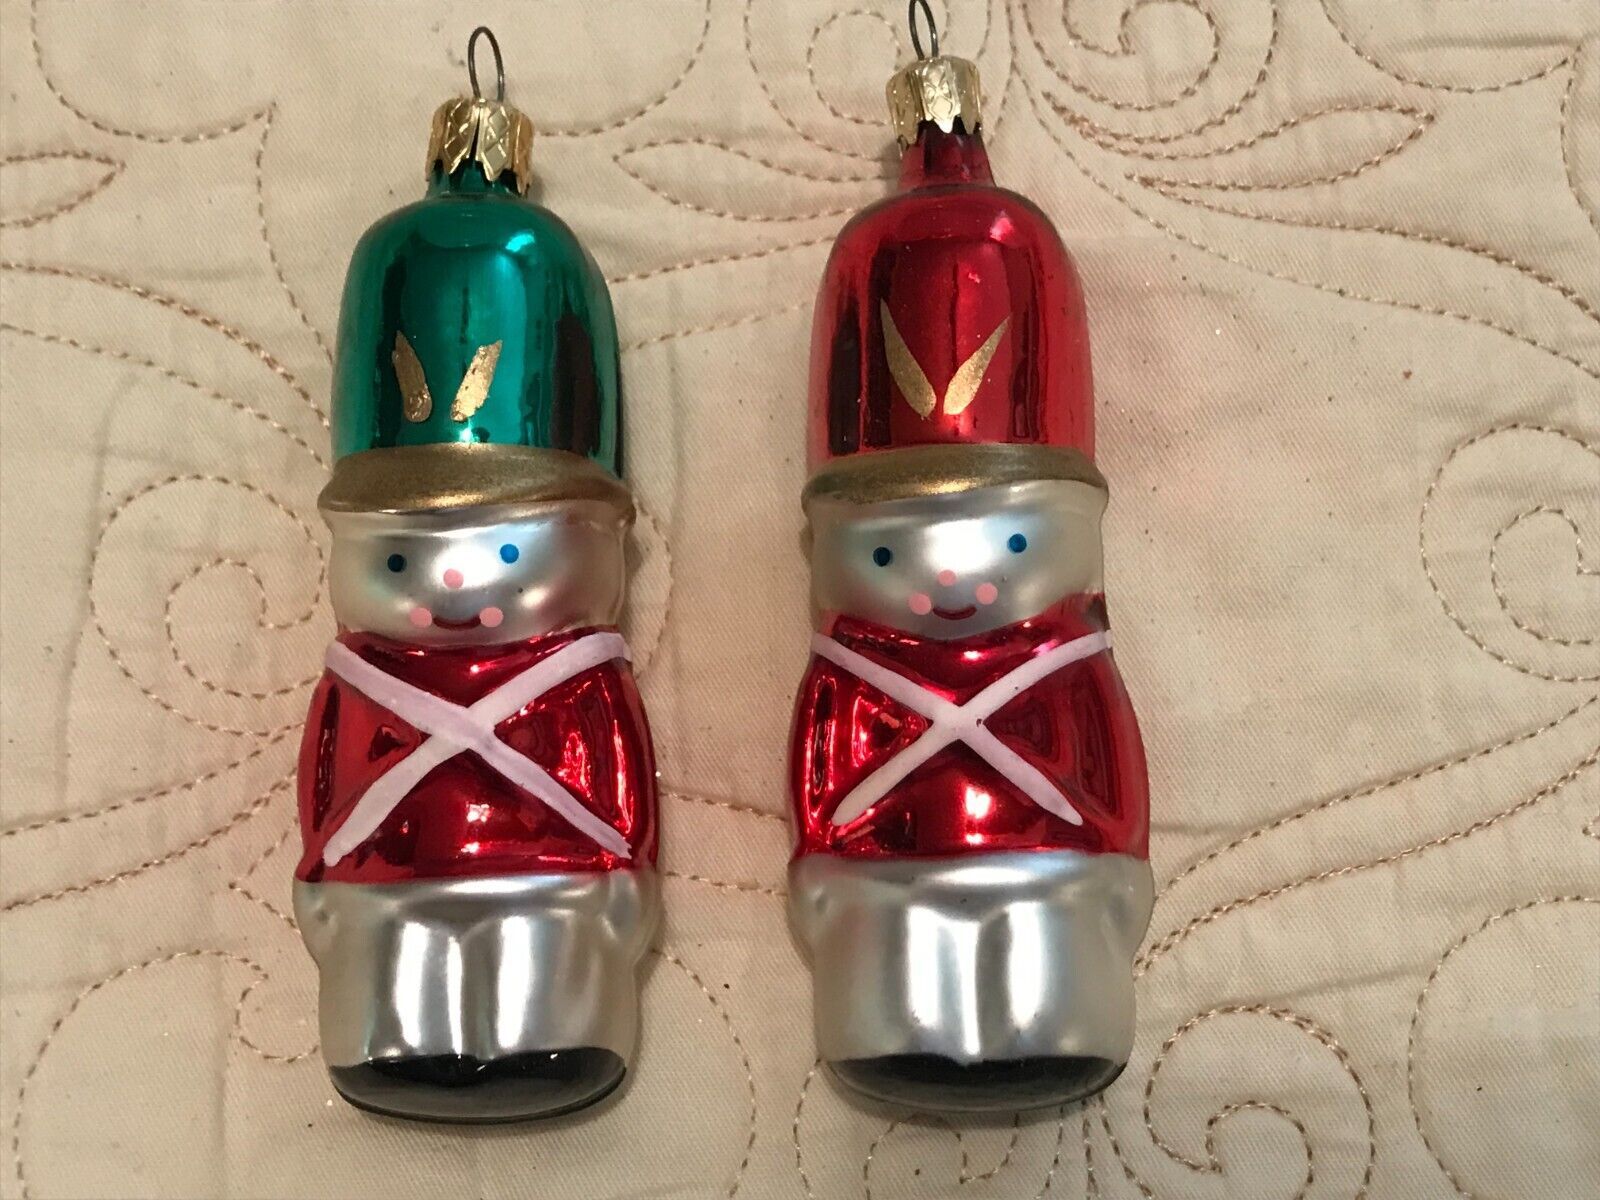 Christmas ornaments set of 2 color glass soldiers columbia CH1791